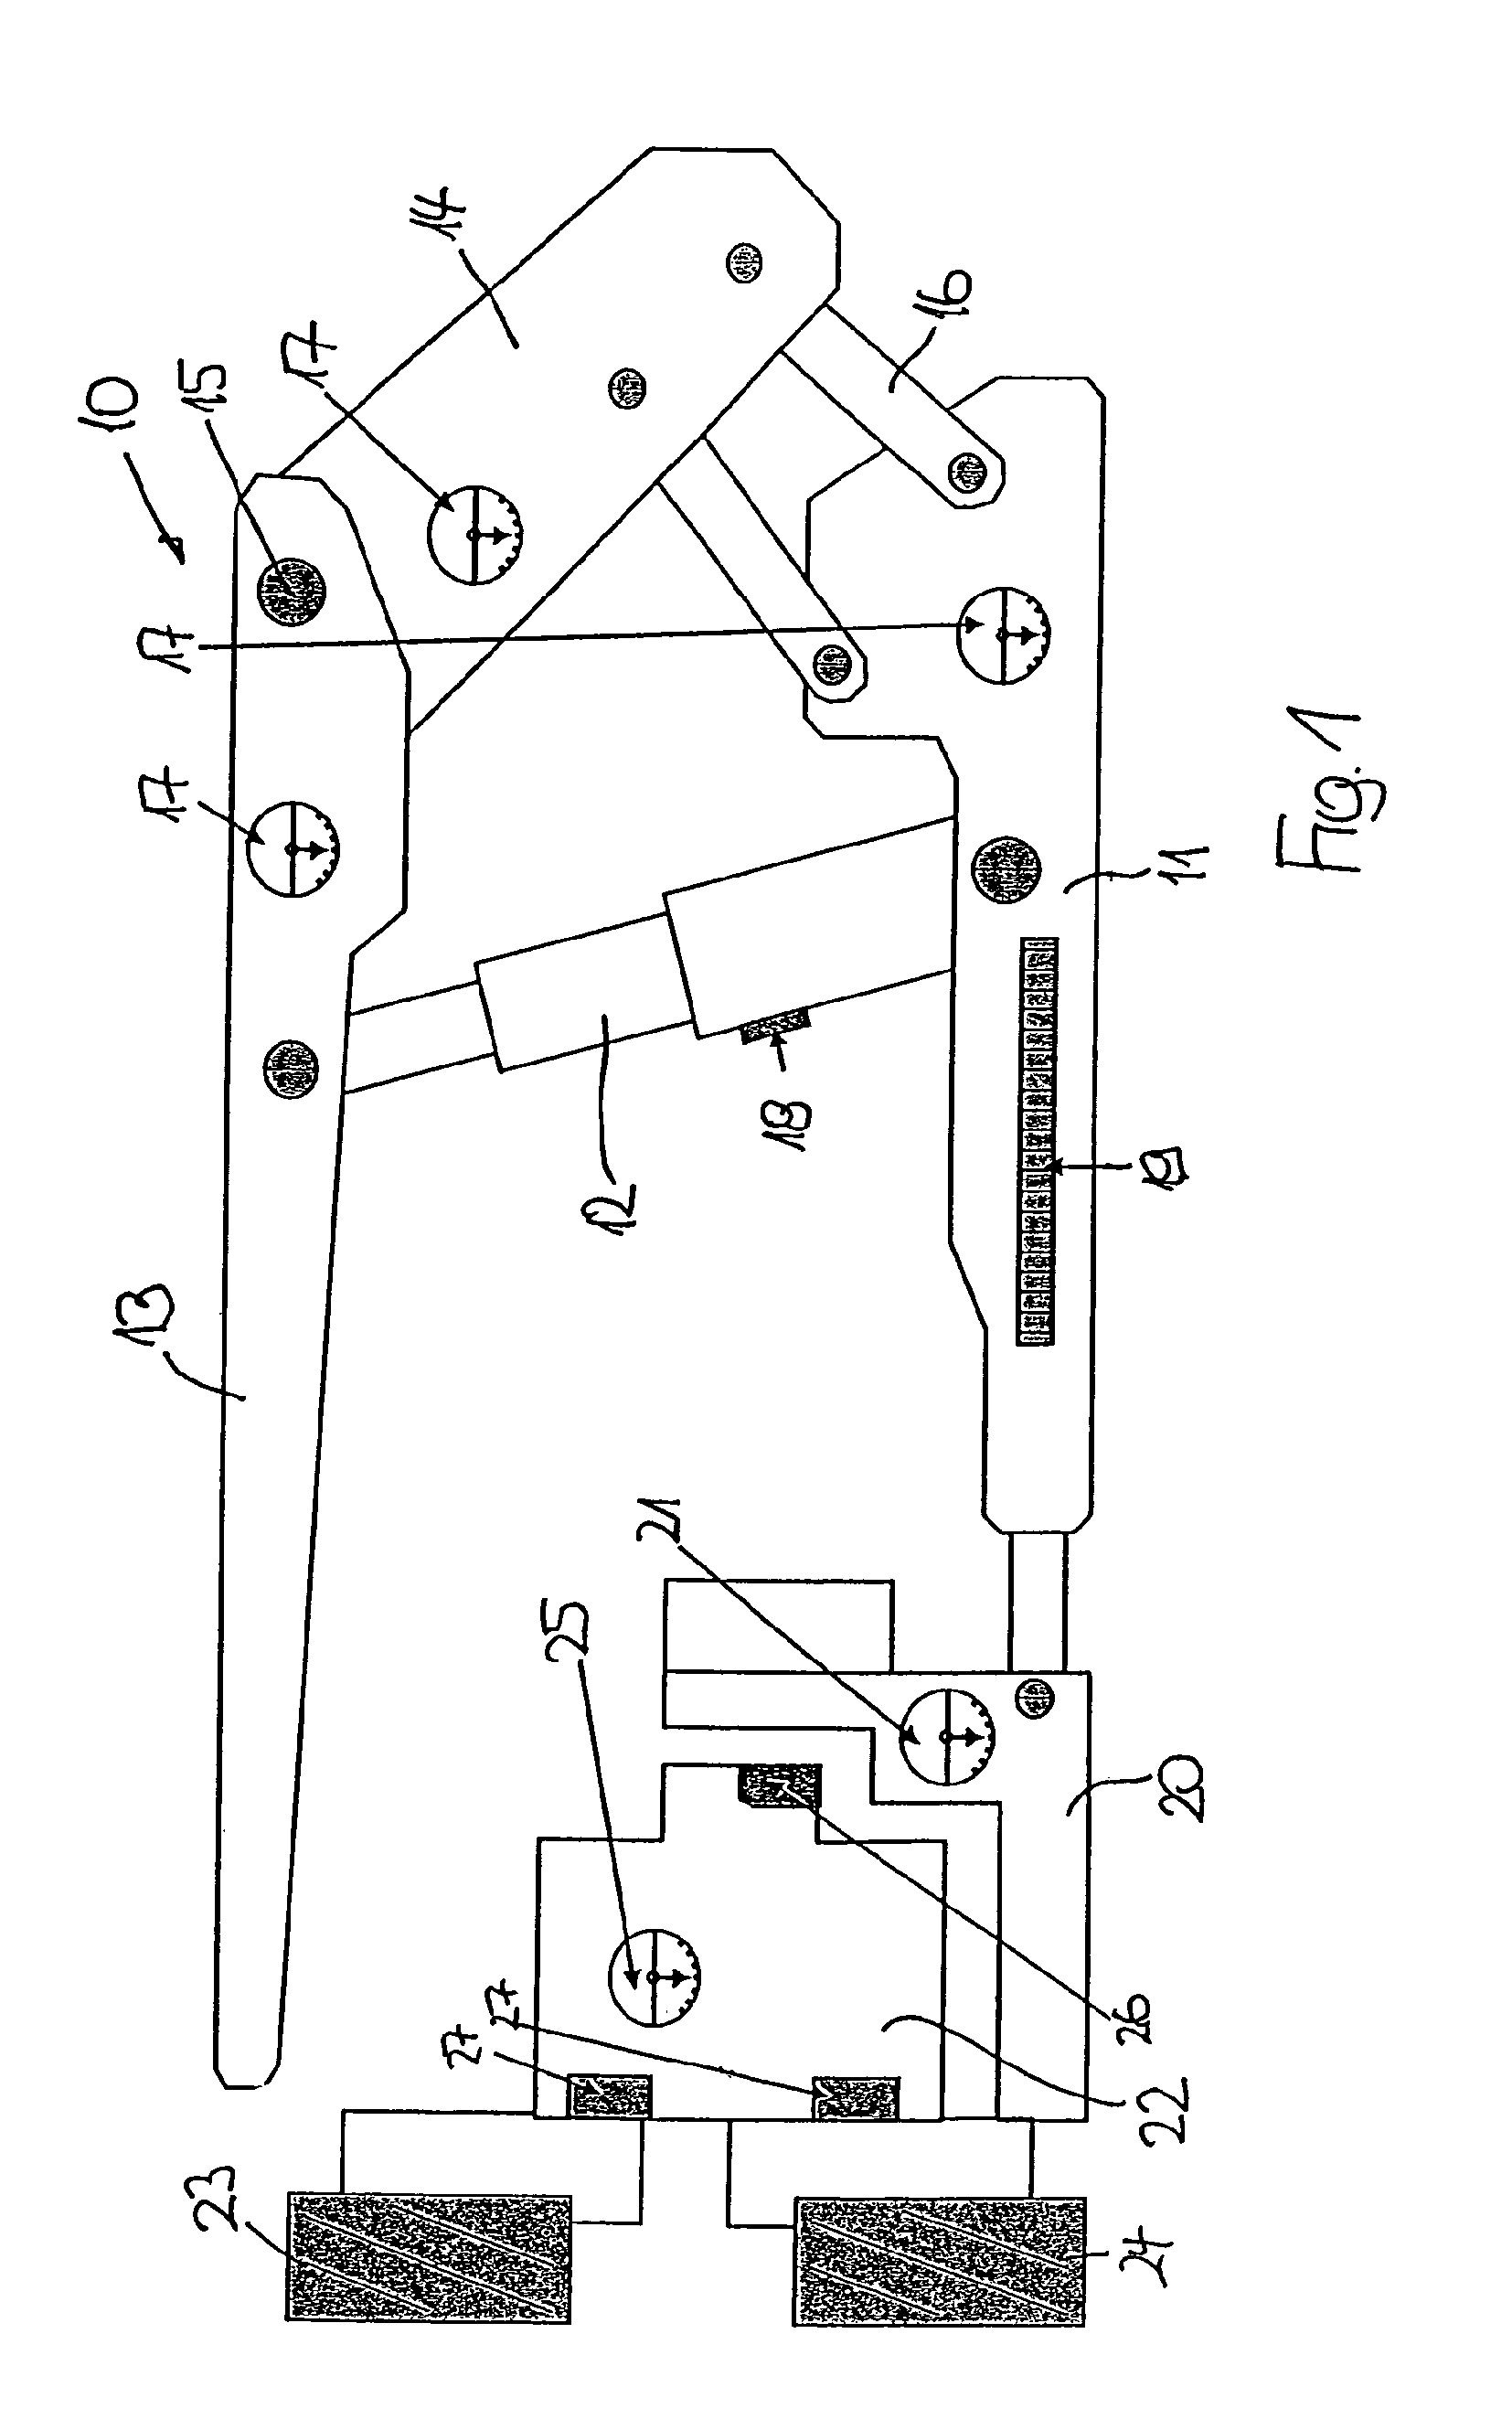 Method for automatically creating a defined face opening in longwall mining operations